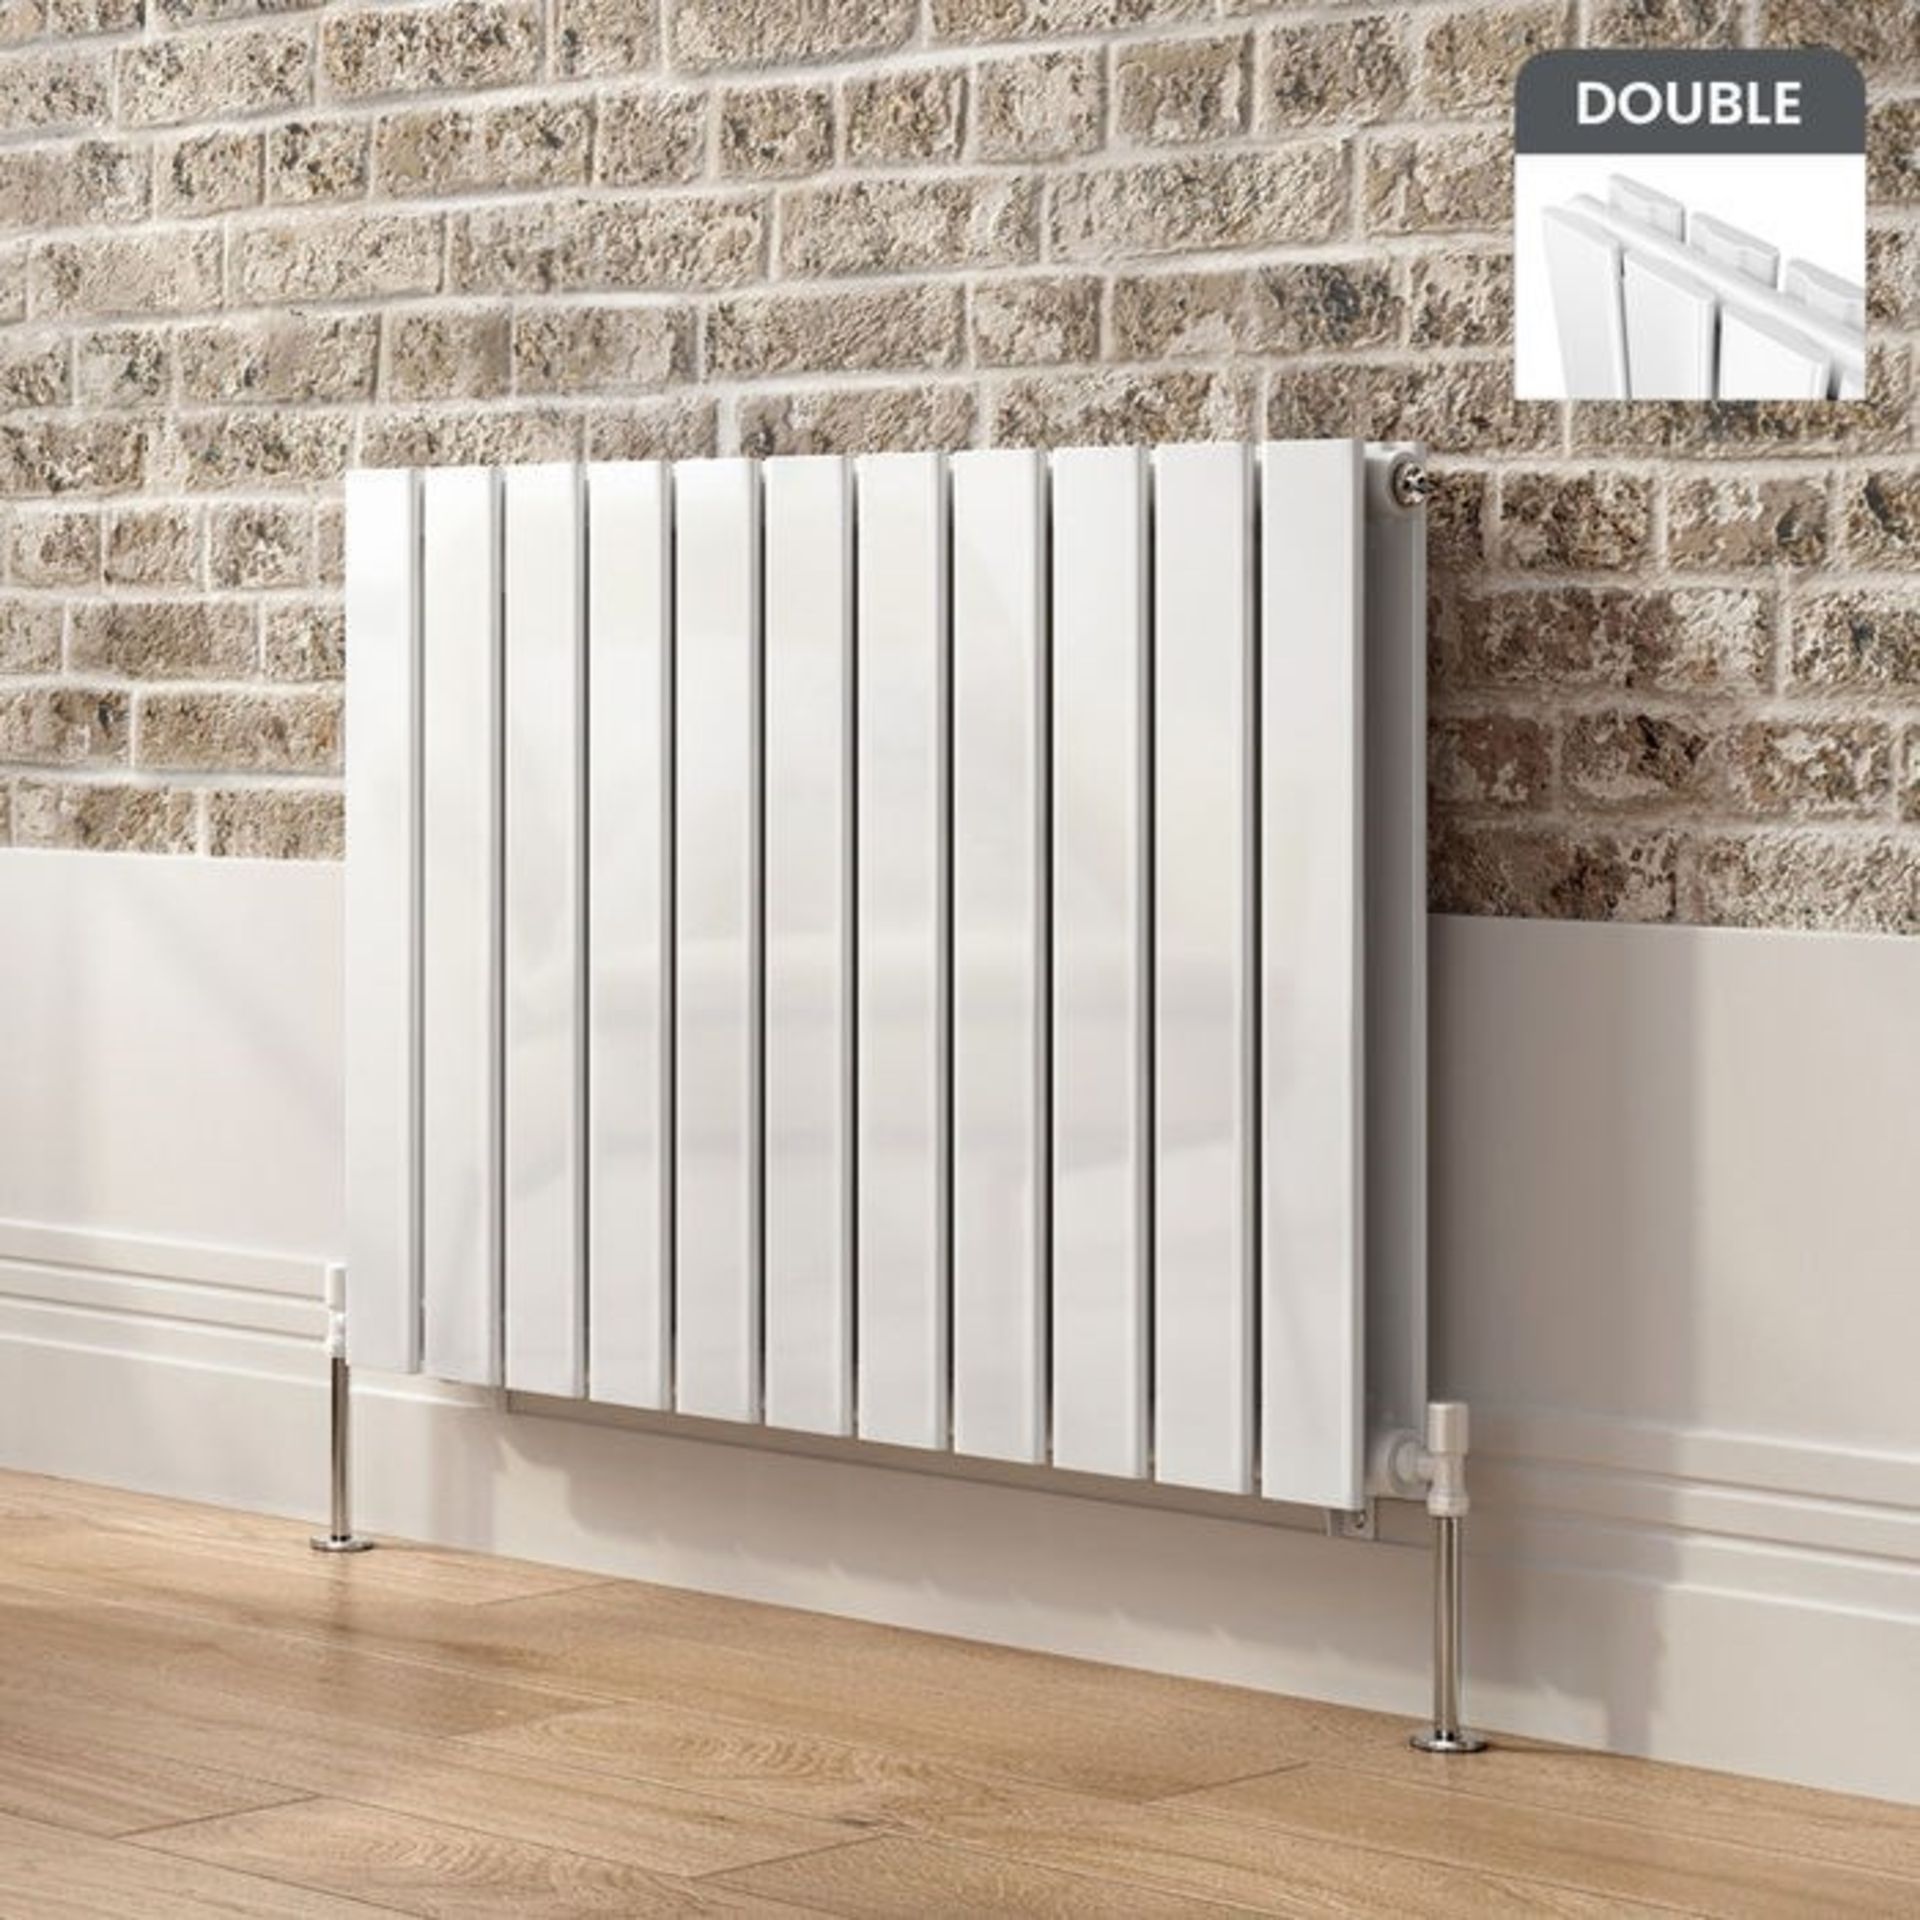 600x830mm Gloss White Double Flat Panel Horizontal Radiator. RRP £474.99.RC221.Made with high... - Image 2 of 3